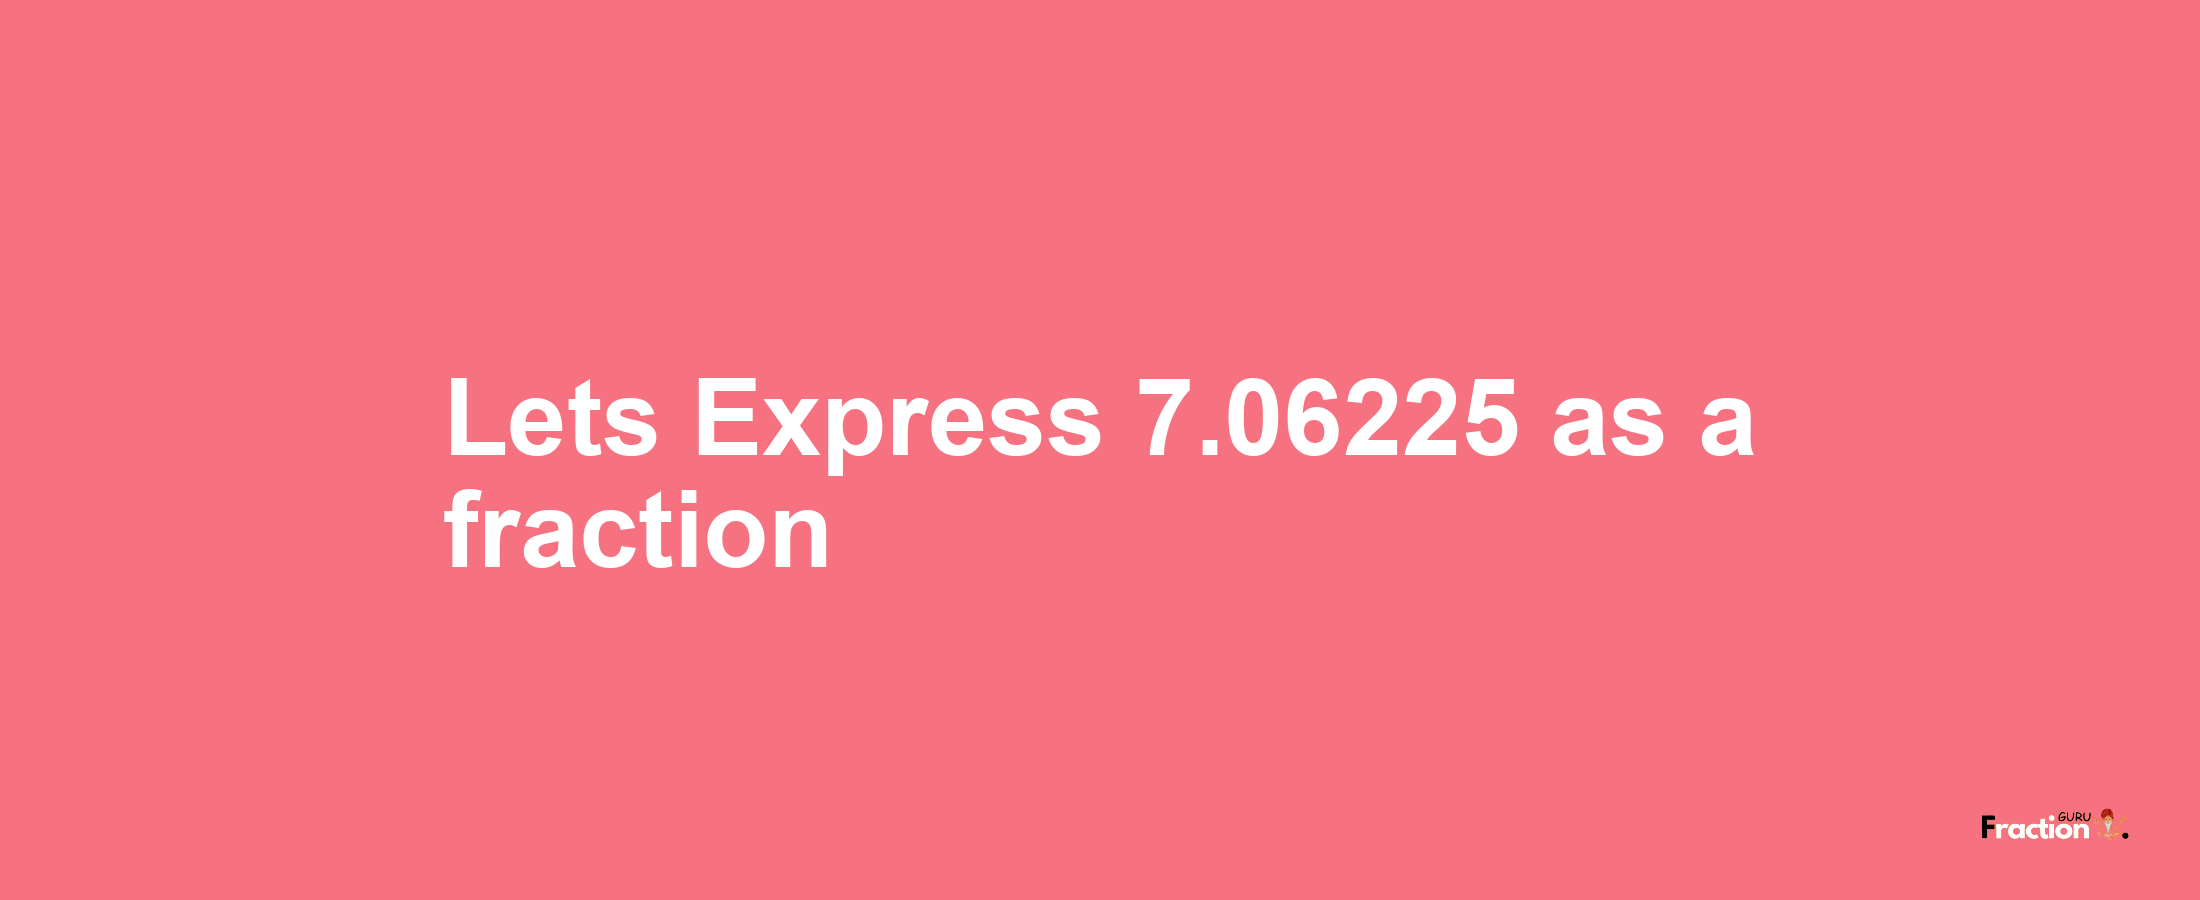 Lets Express 7.06225 as afraction